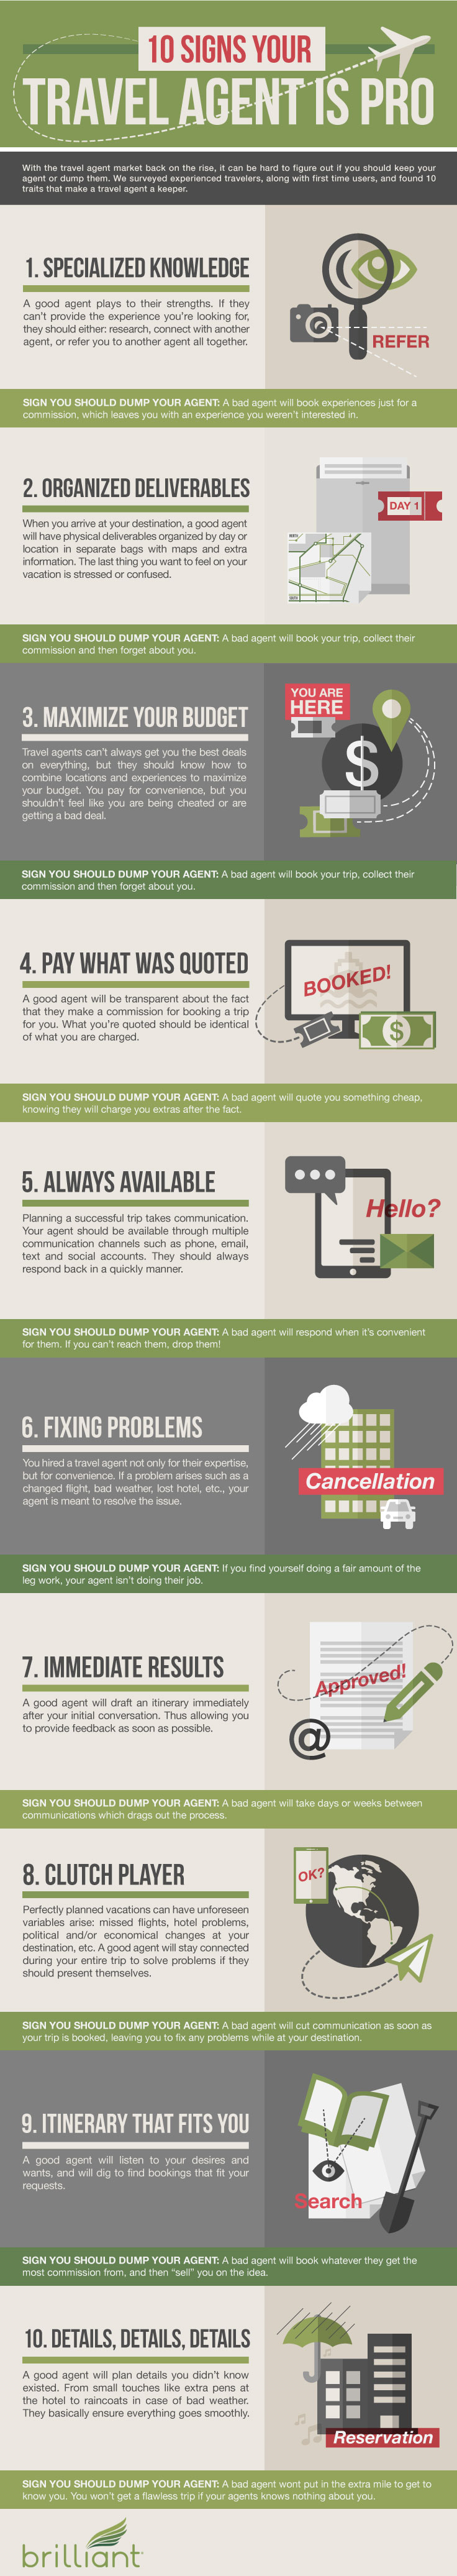 10 Signs Your Travel Agent Is Pro